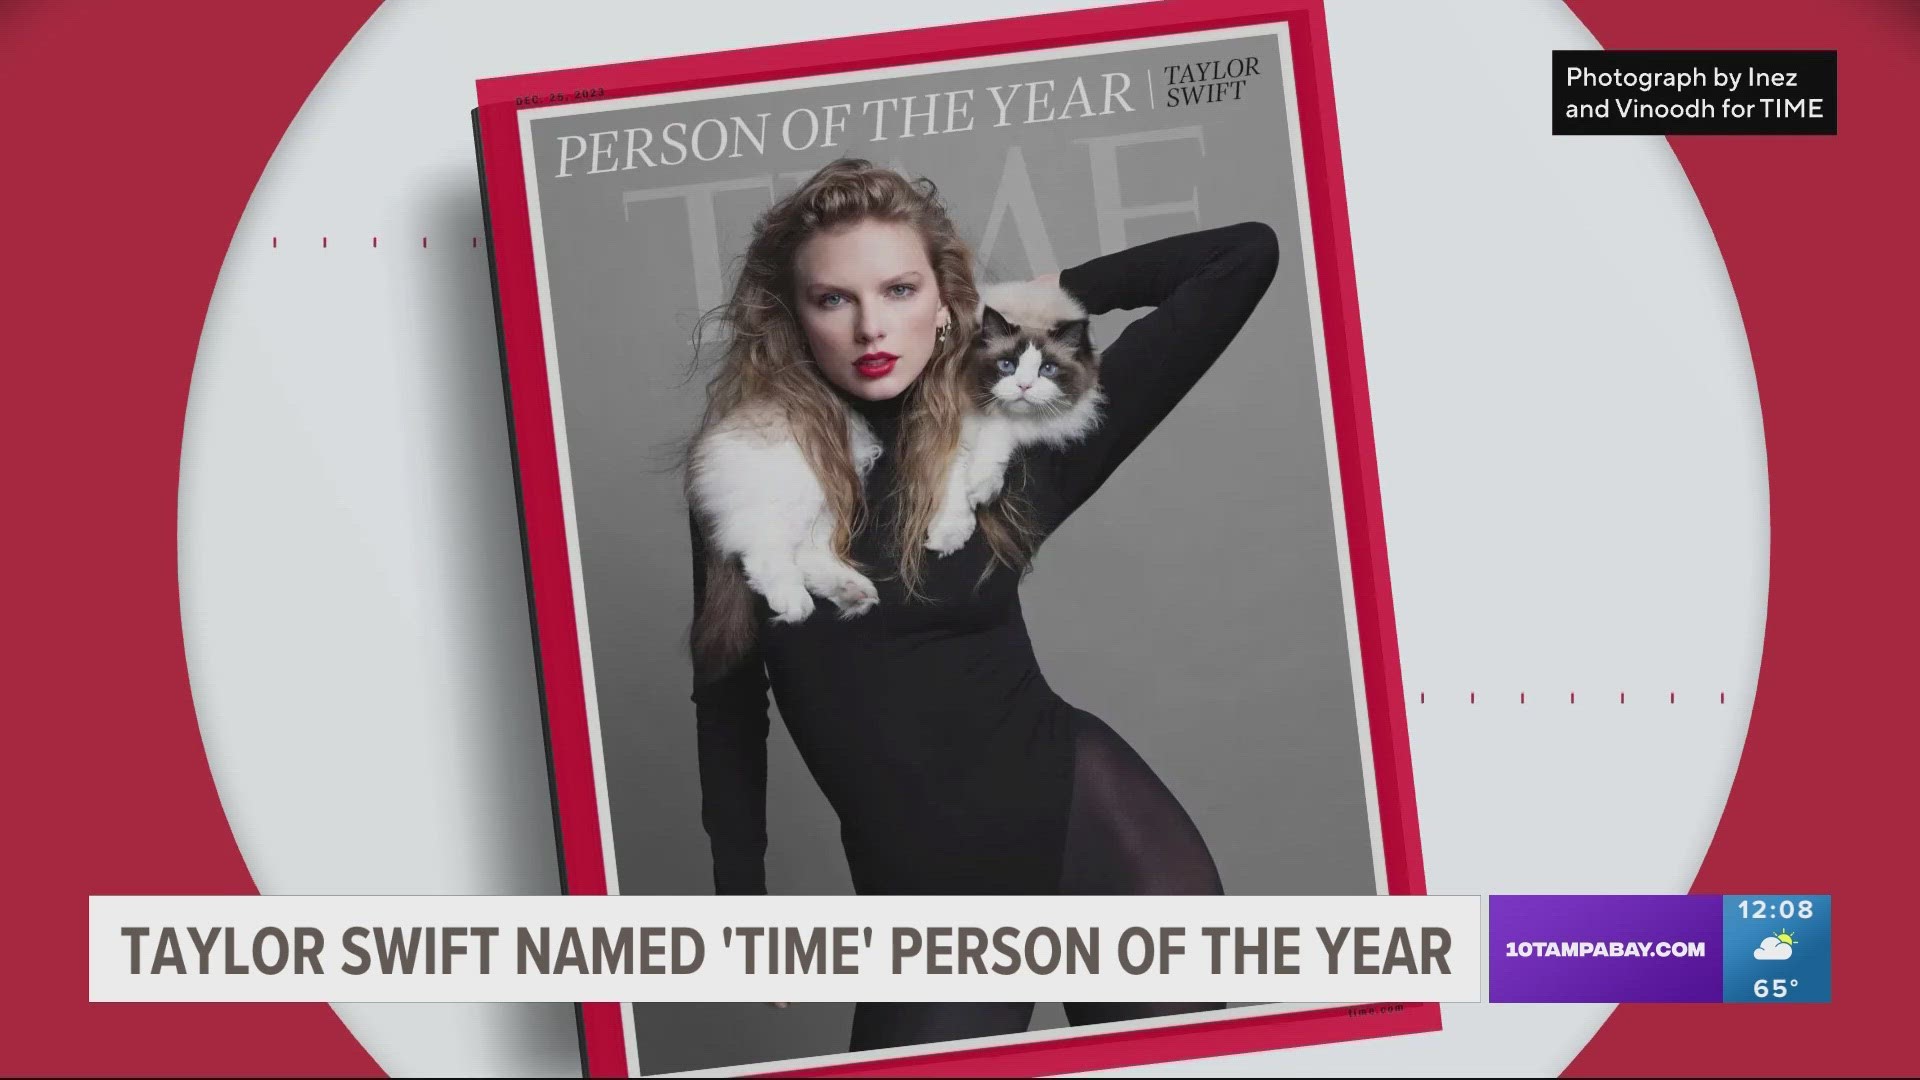 Taylor Swift named Time Magazine's person of the year